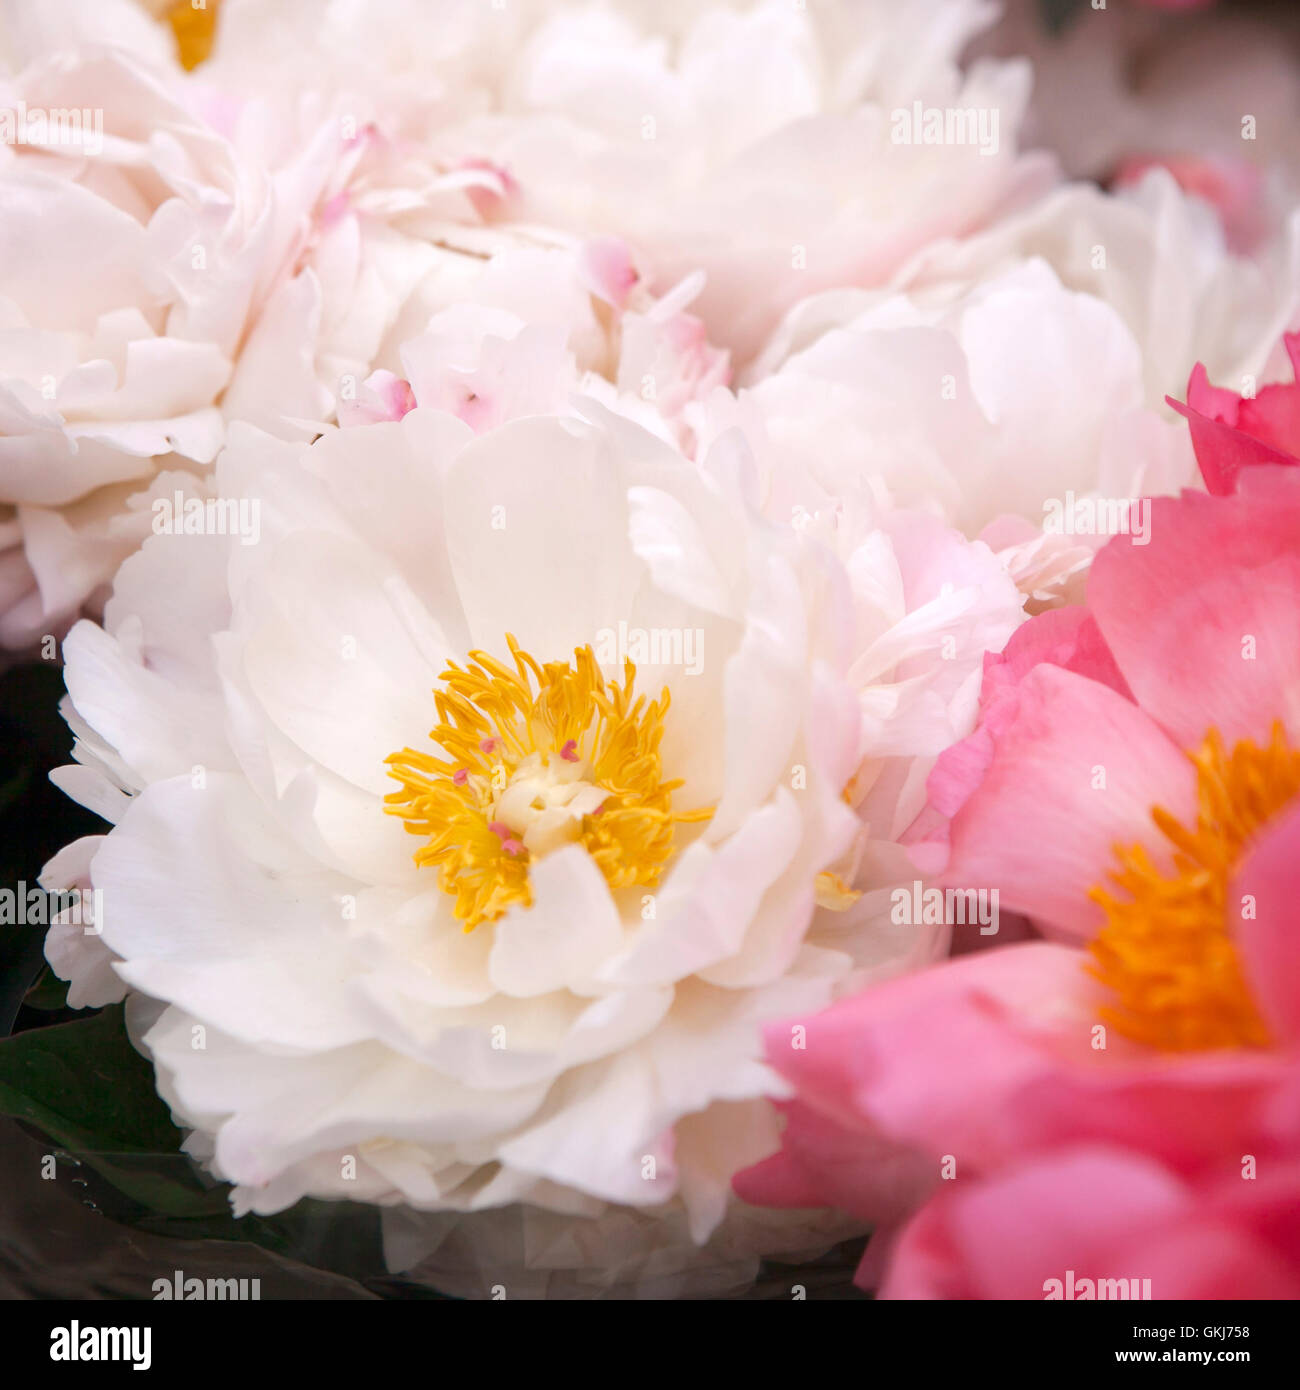 Freshly picked bouquet of peony flowers on display at the farmers market Stock Photo